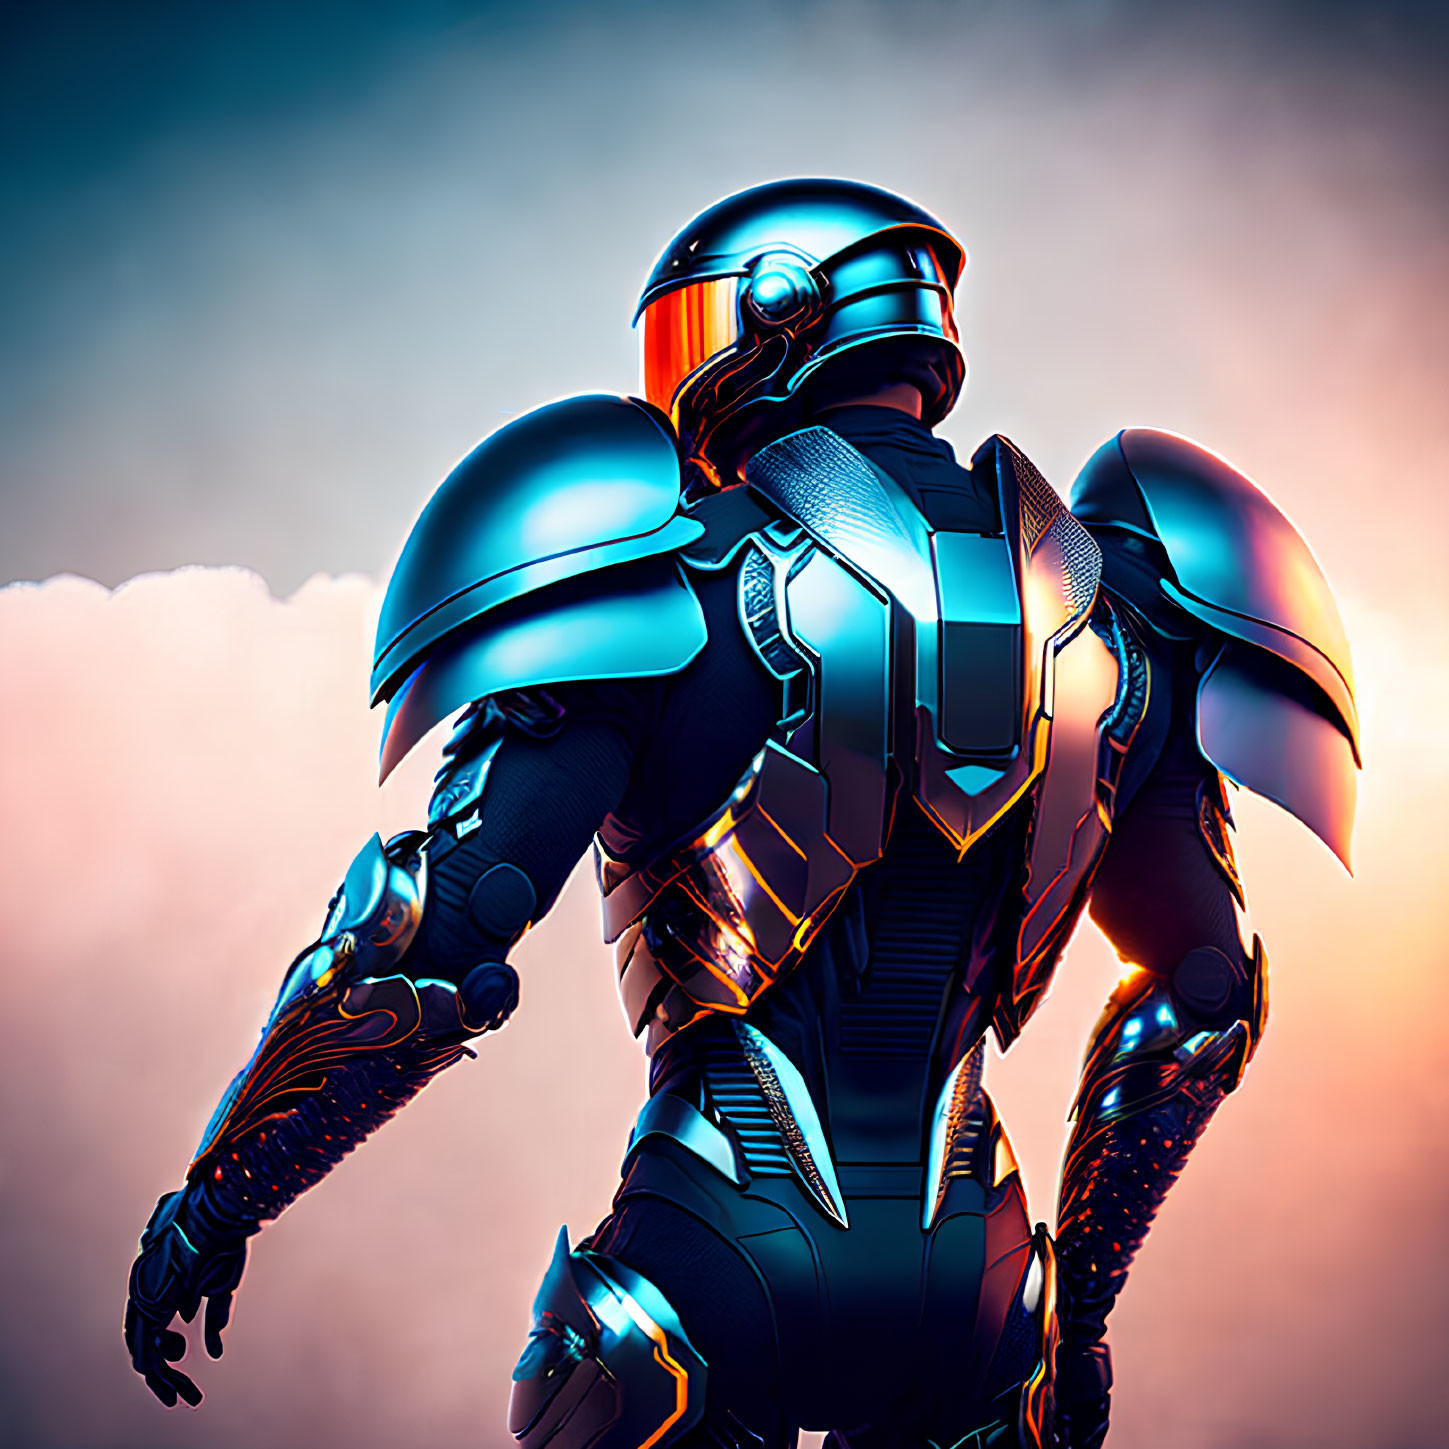 Futuristic armored robot against pink and blue clouded backdrop